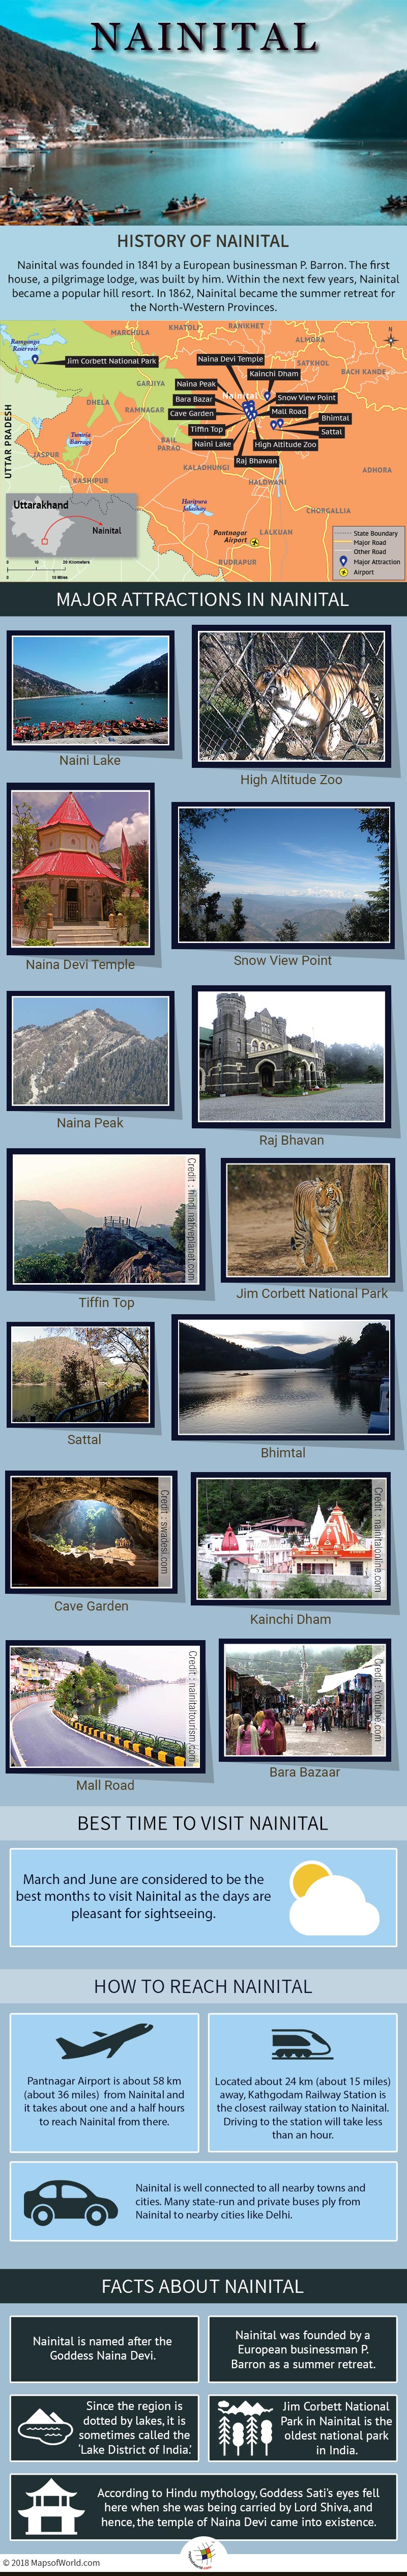 Popular Places to Visit in Nainital